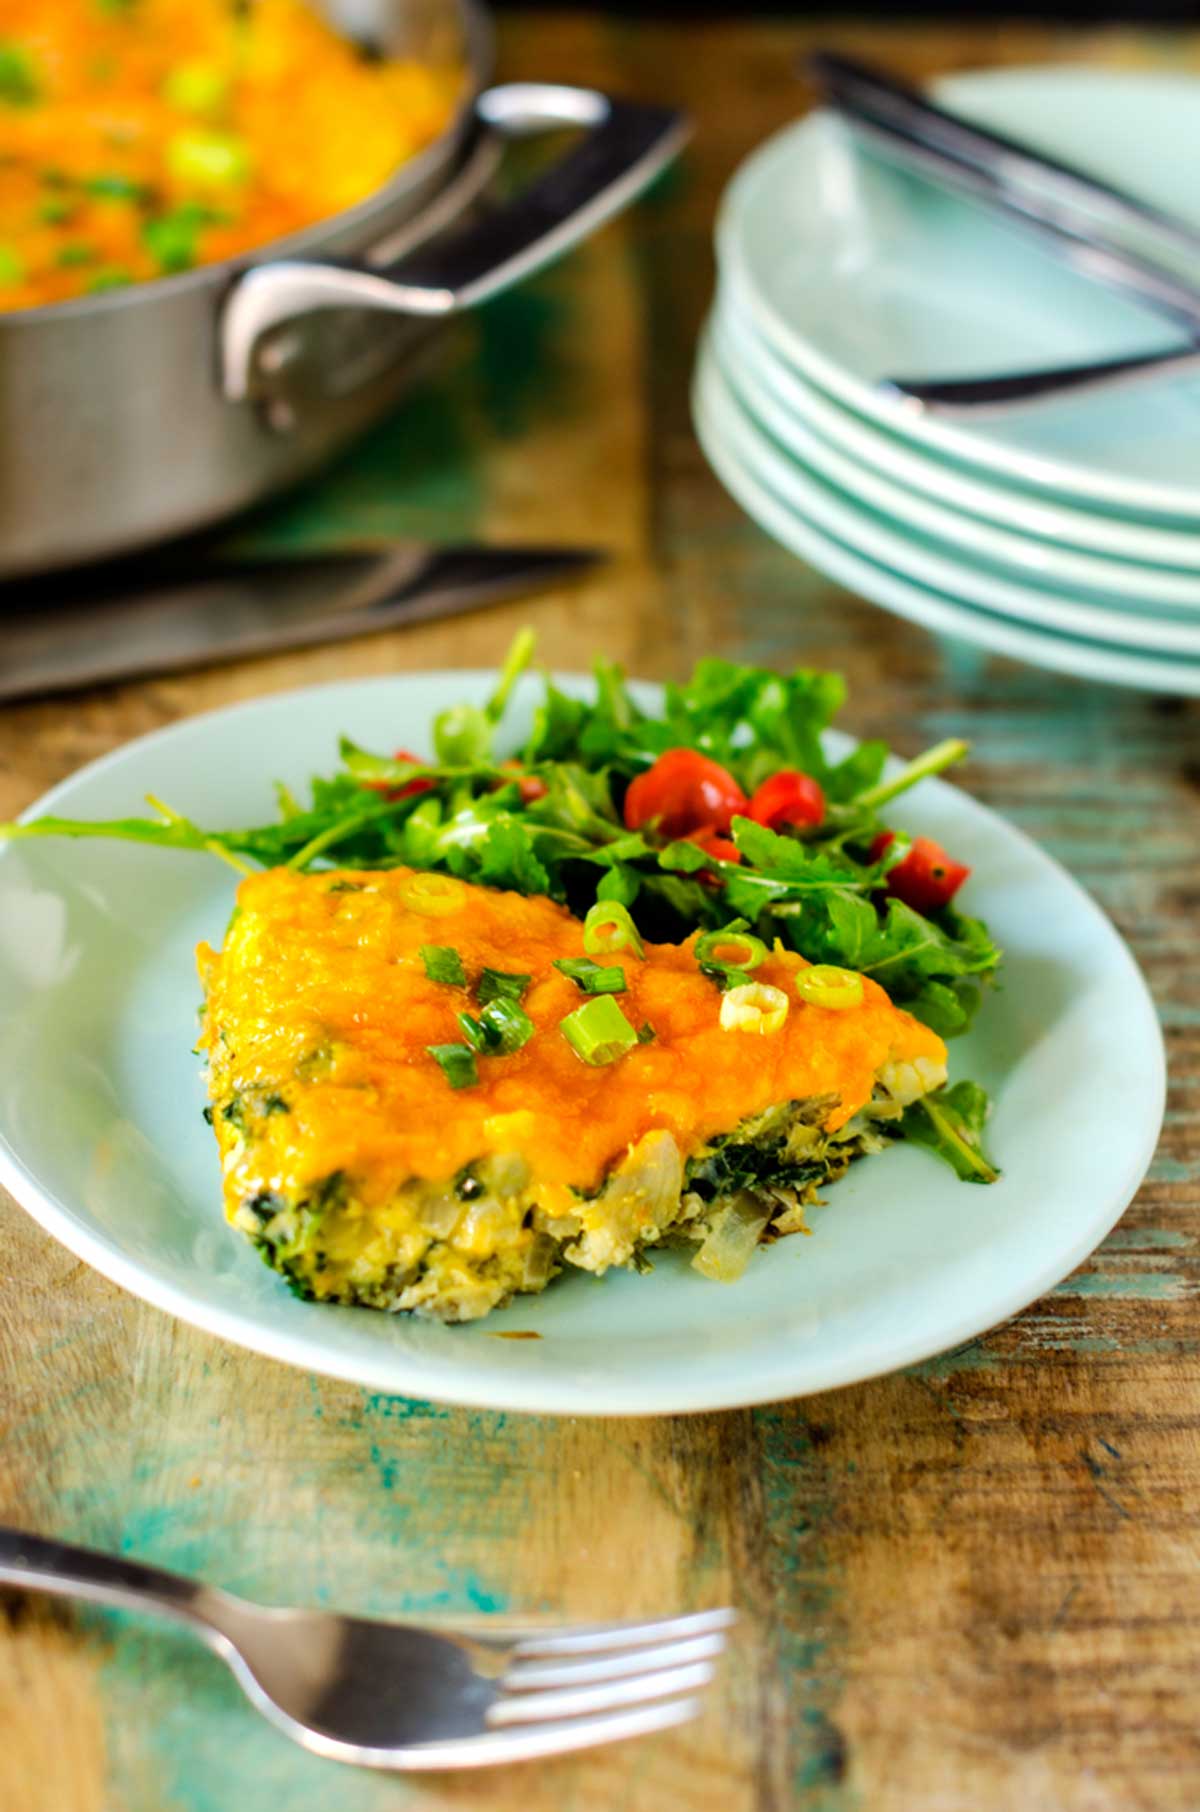 Photo of a light blue plate with a spinach artichoke frittata sitting next to a green salad.